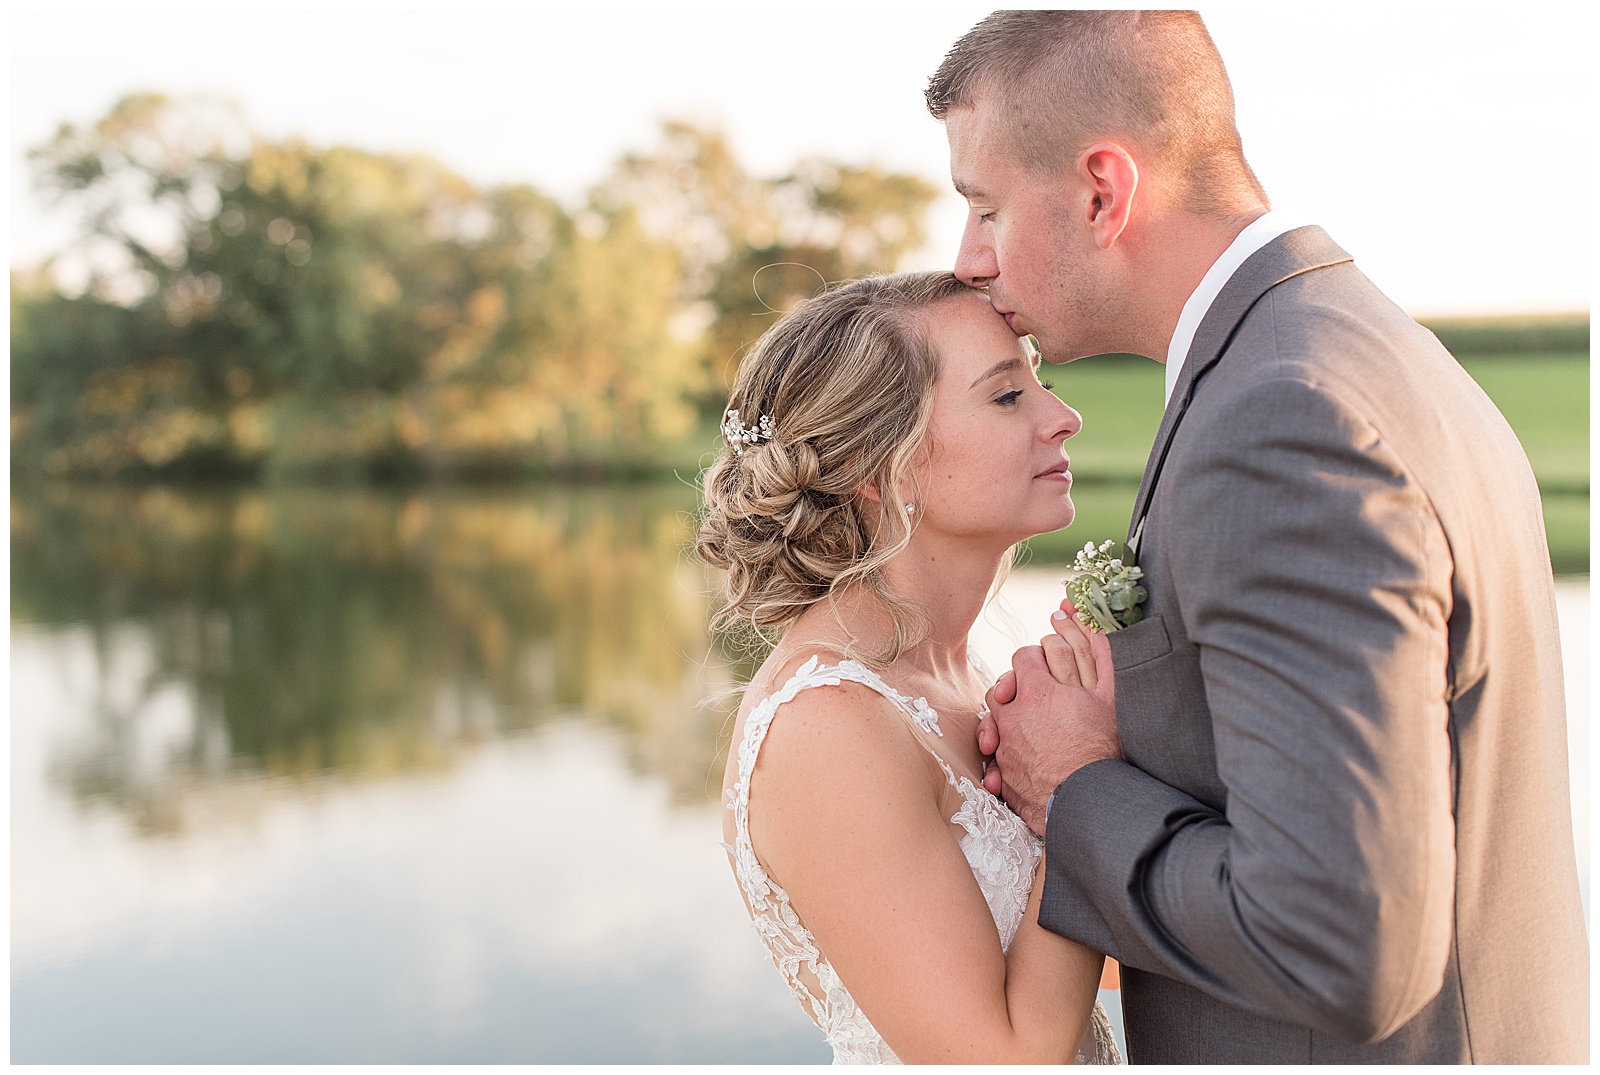 close up of the groom kissing the bride's forehead as she smiles and closes her eyes and she is on the left and the groom is on the right with the pond and trees behind them at Lakefield Weddings in Manheim, PA